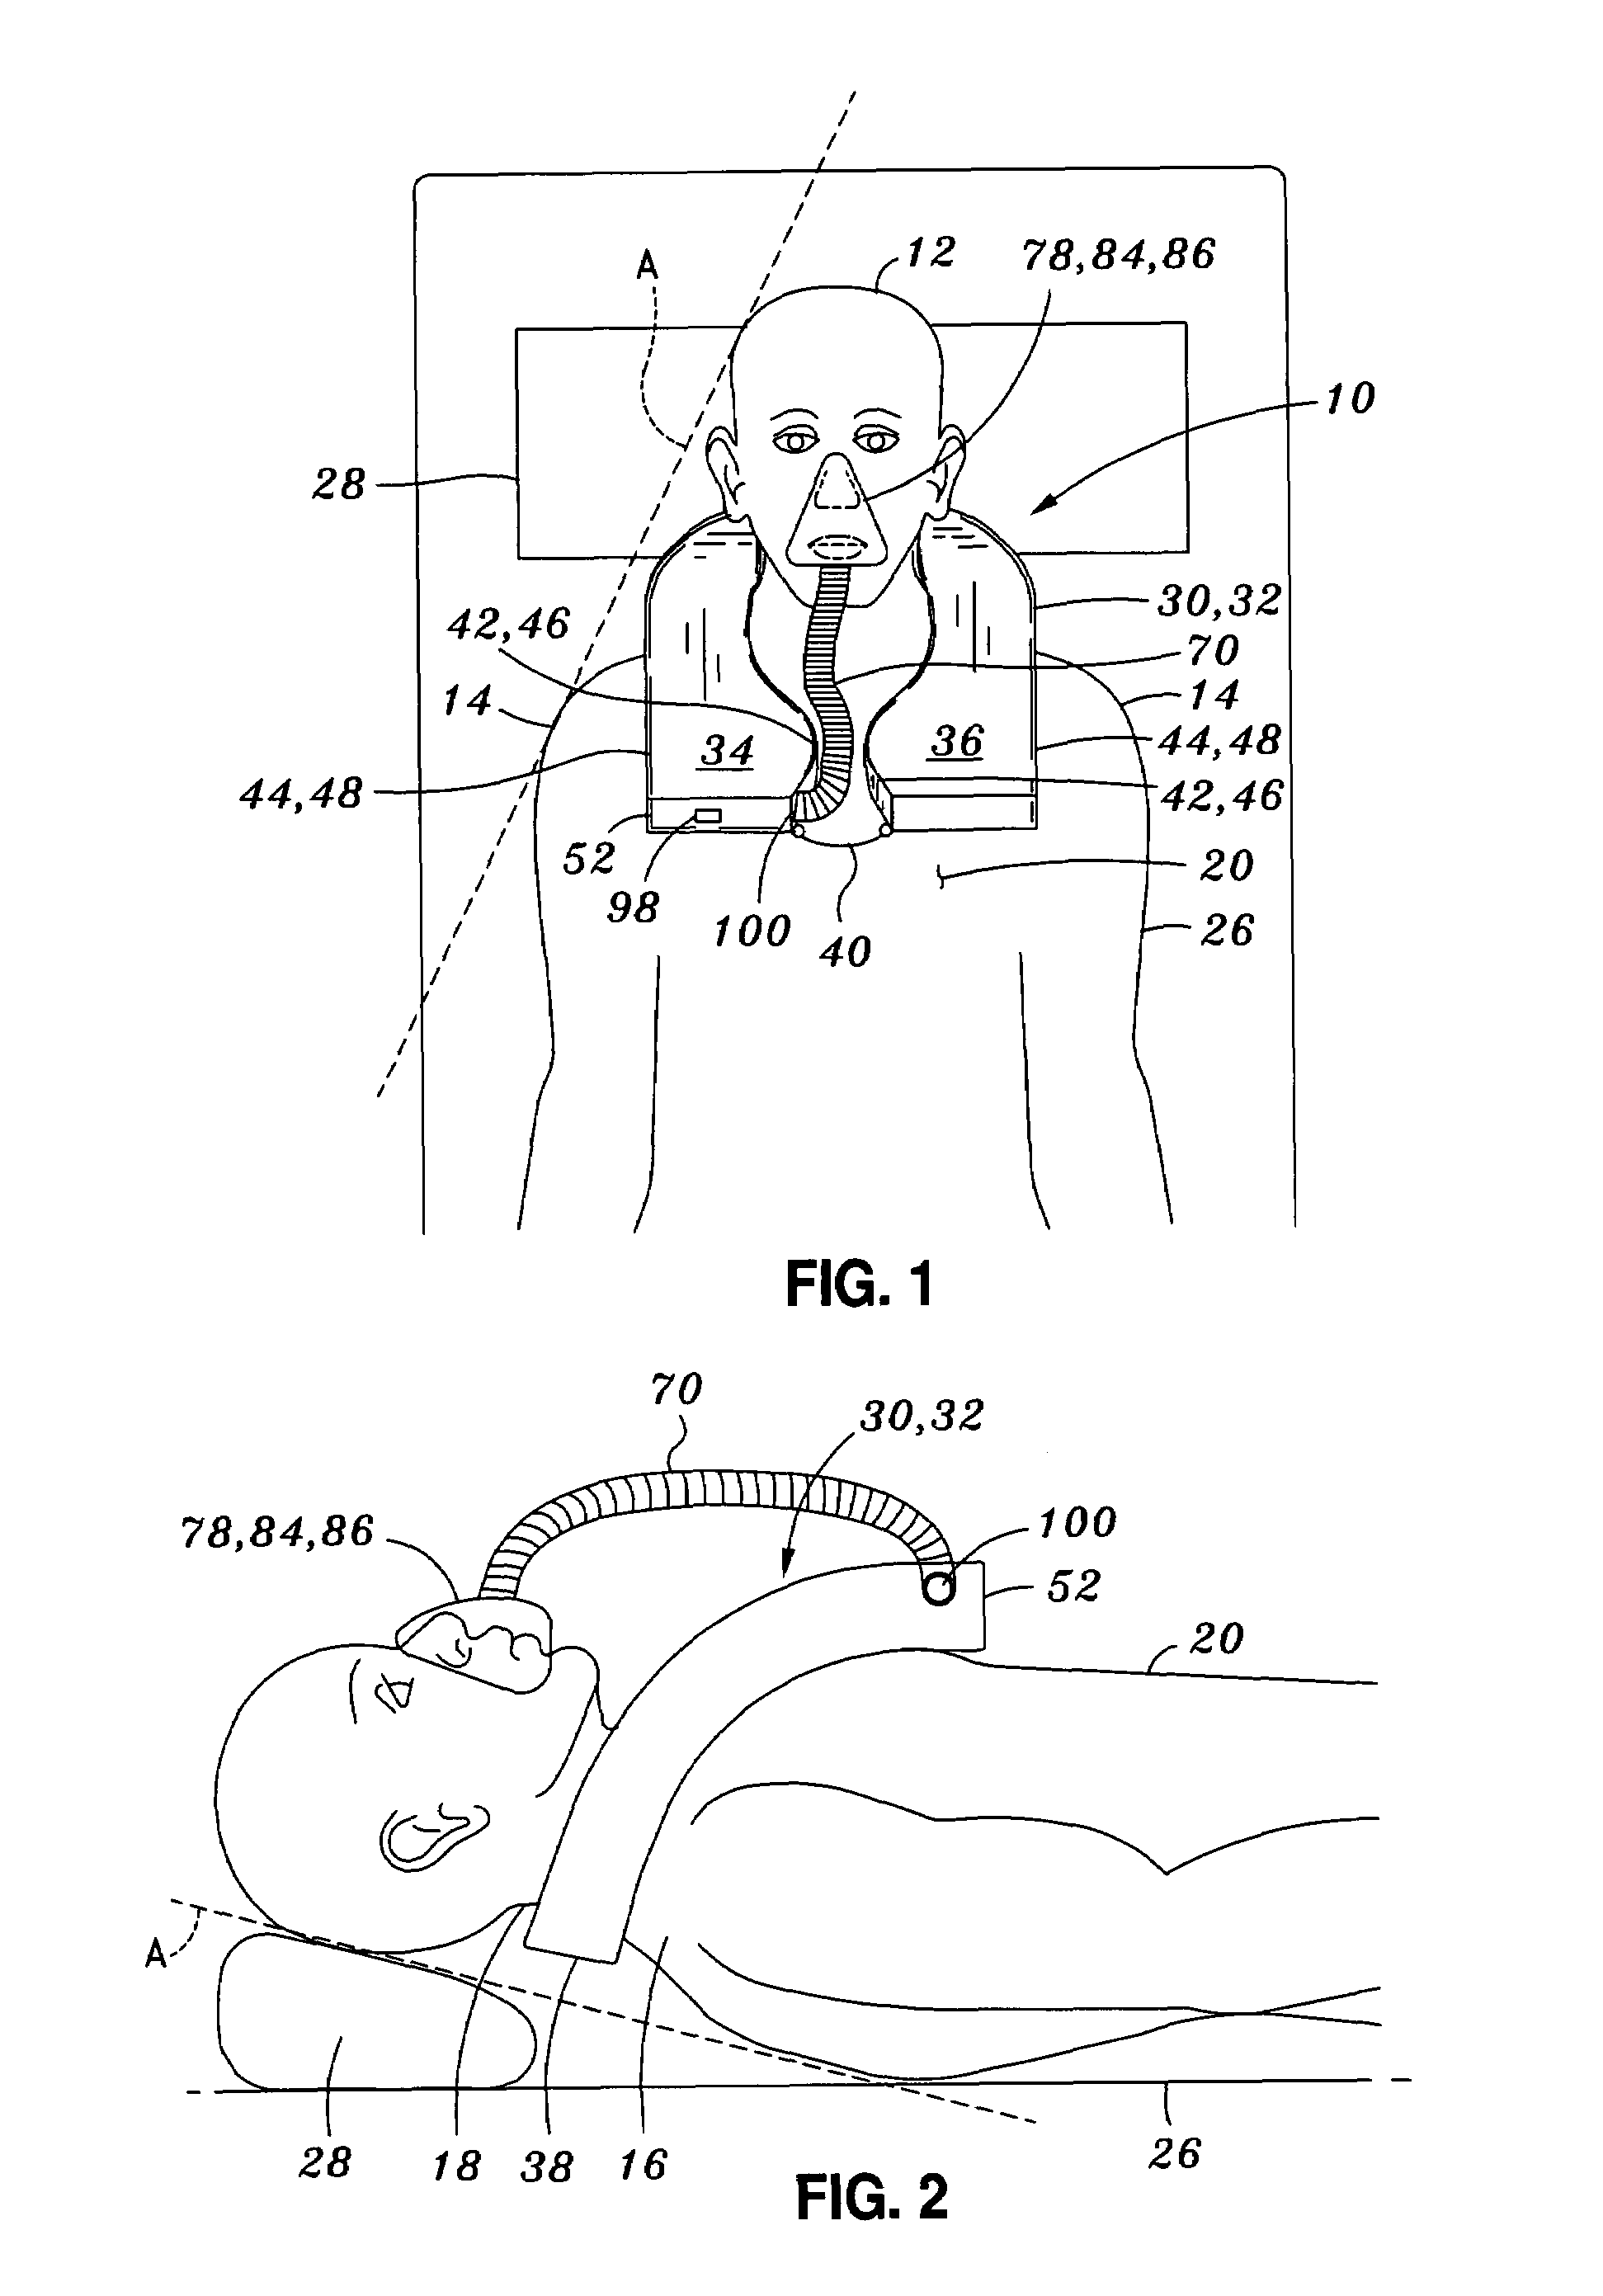 Continuous positive airway pressure device and configuration for employing same